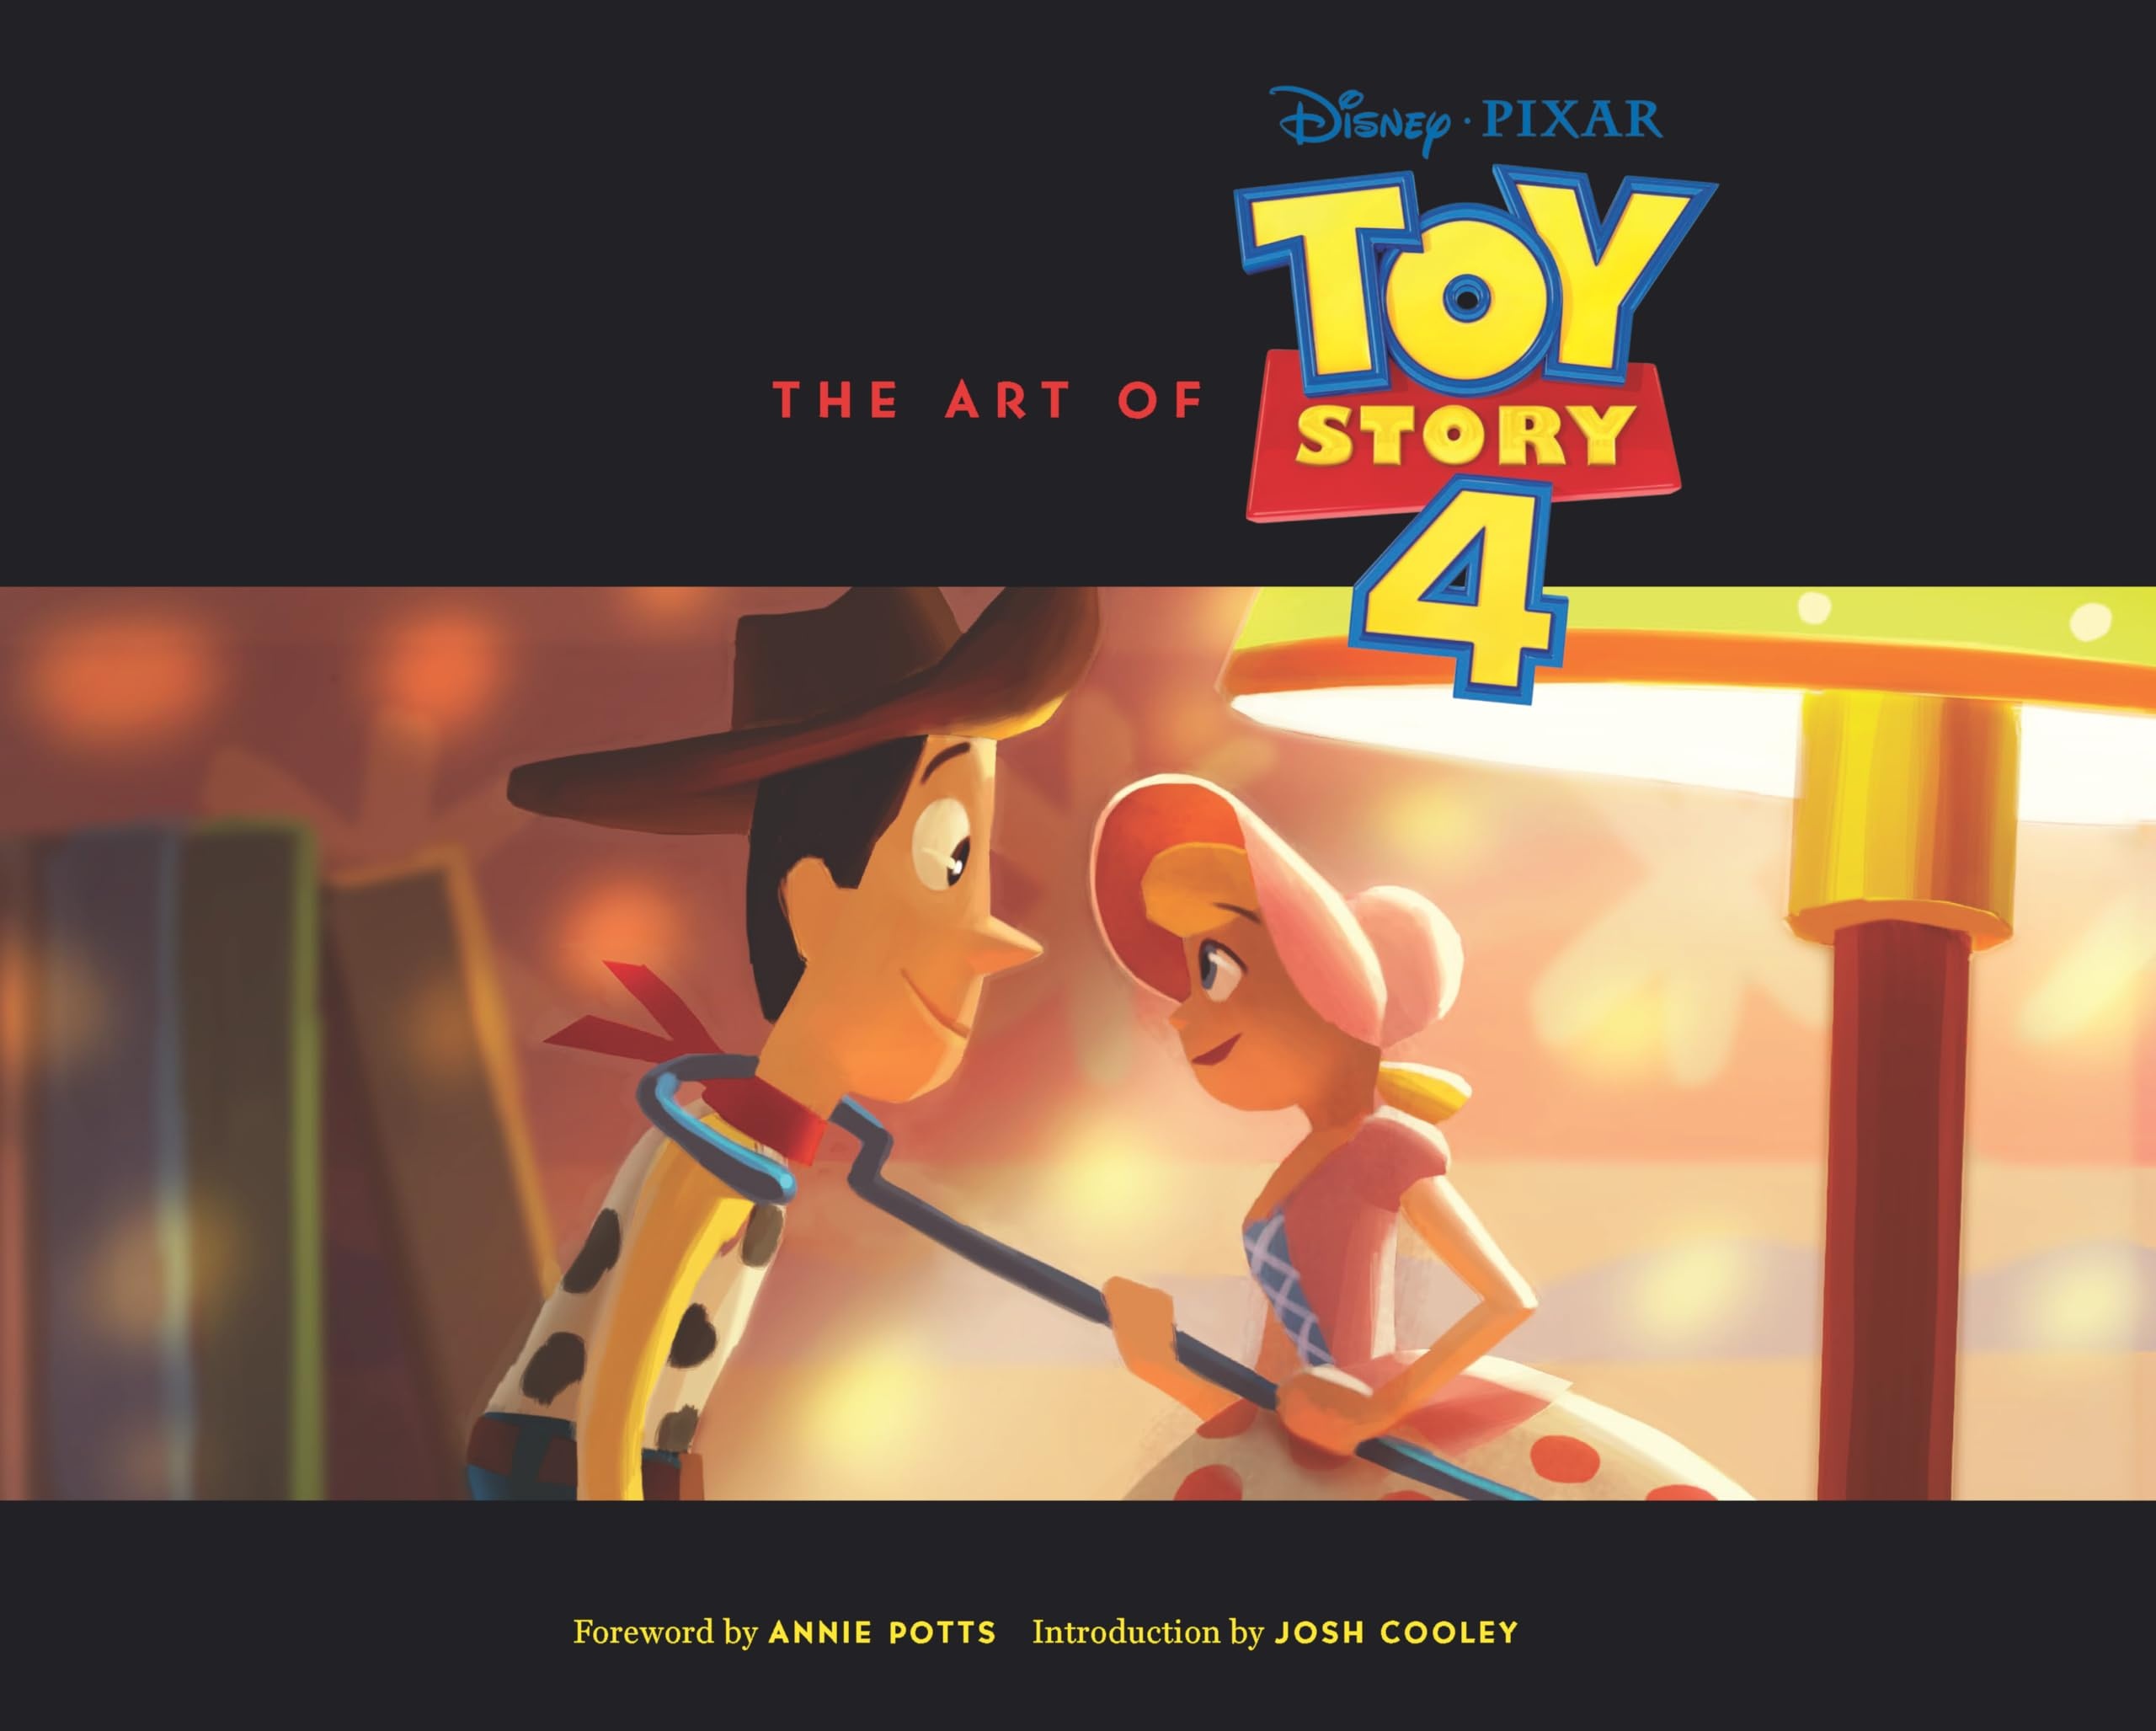 The Art of Toy Story 4: (Toy Story Art Book, Pixar Animation Process Book) (Disney)